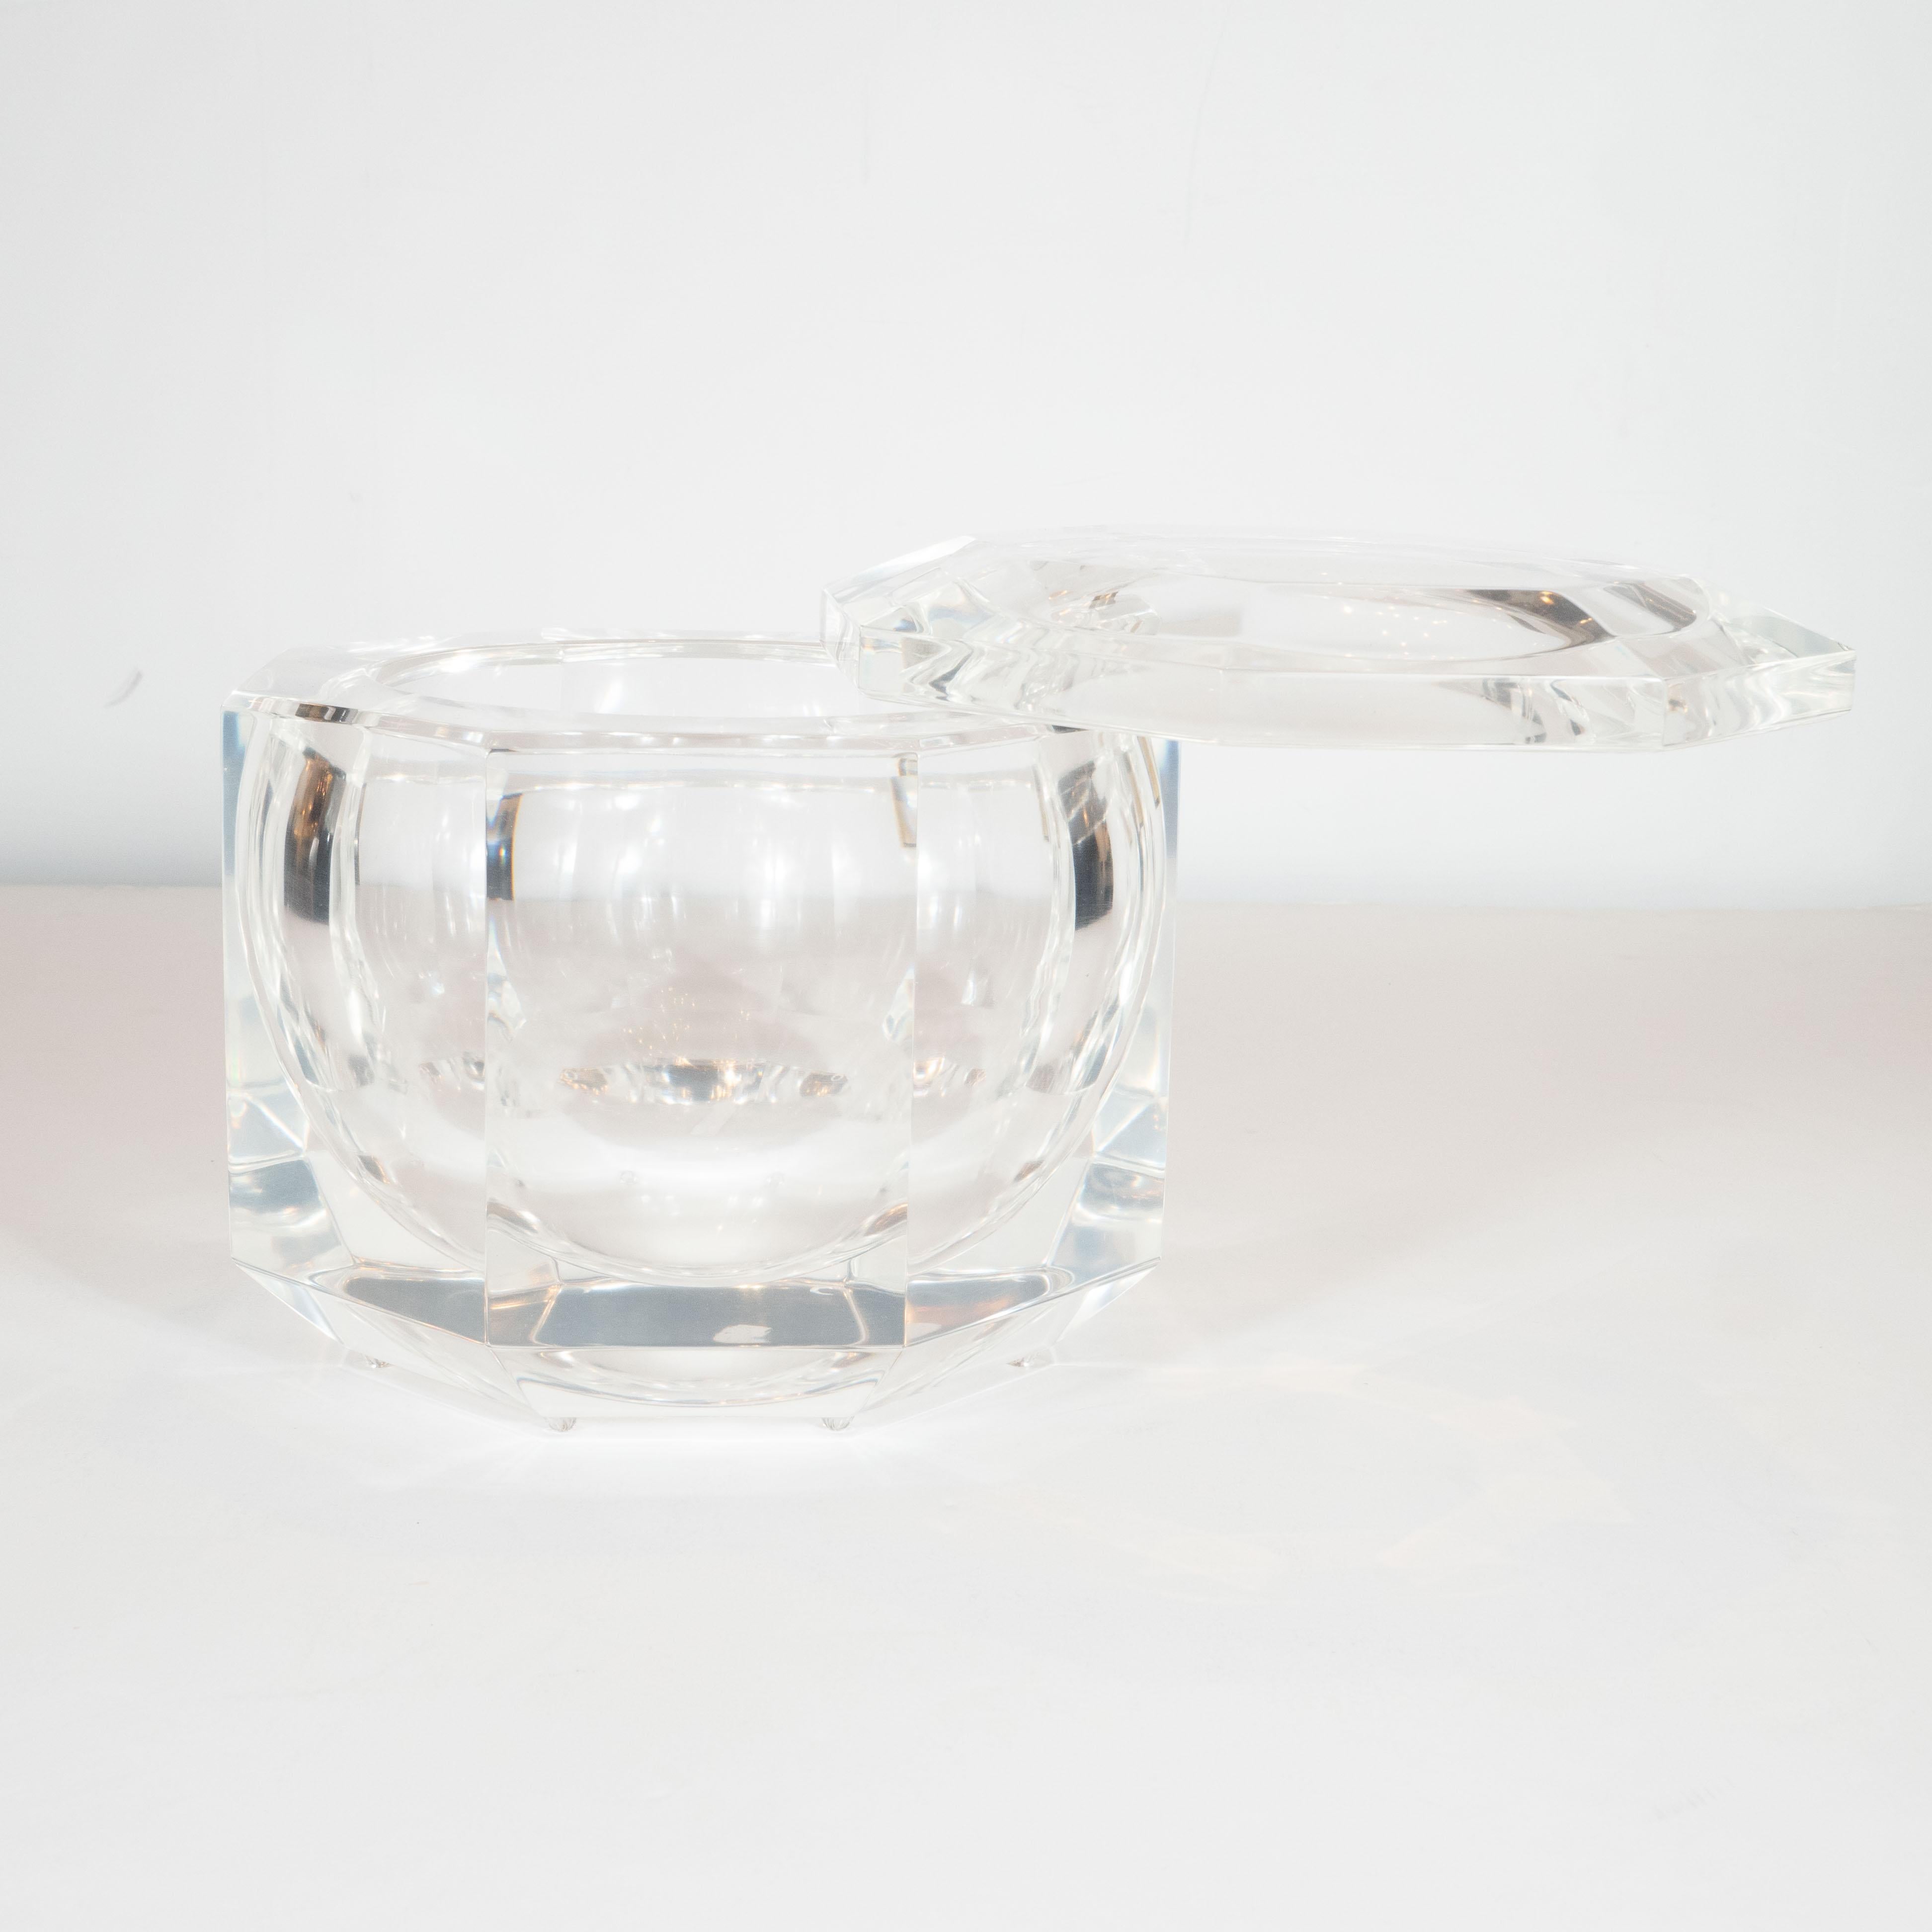 American Midcentury Faceted Swivel Top Lucite Octagon Ice Bucket by Carole Stupell